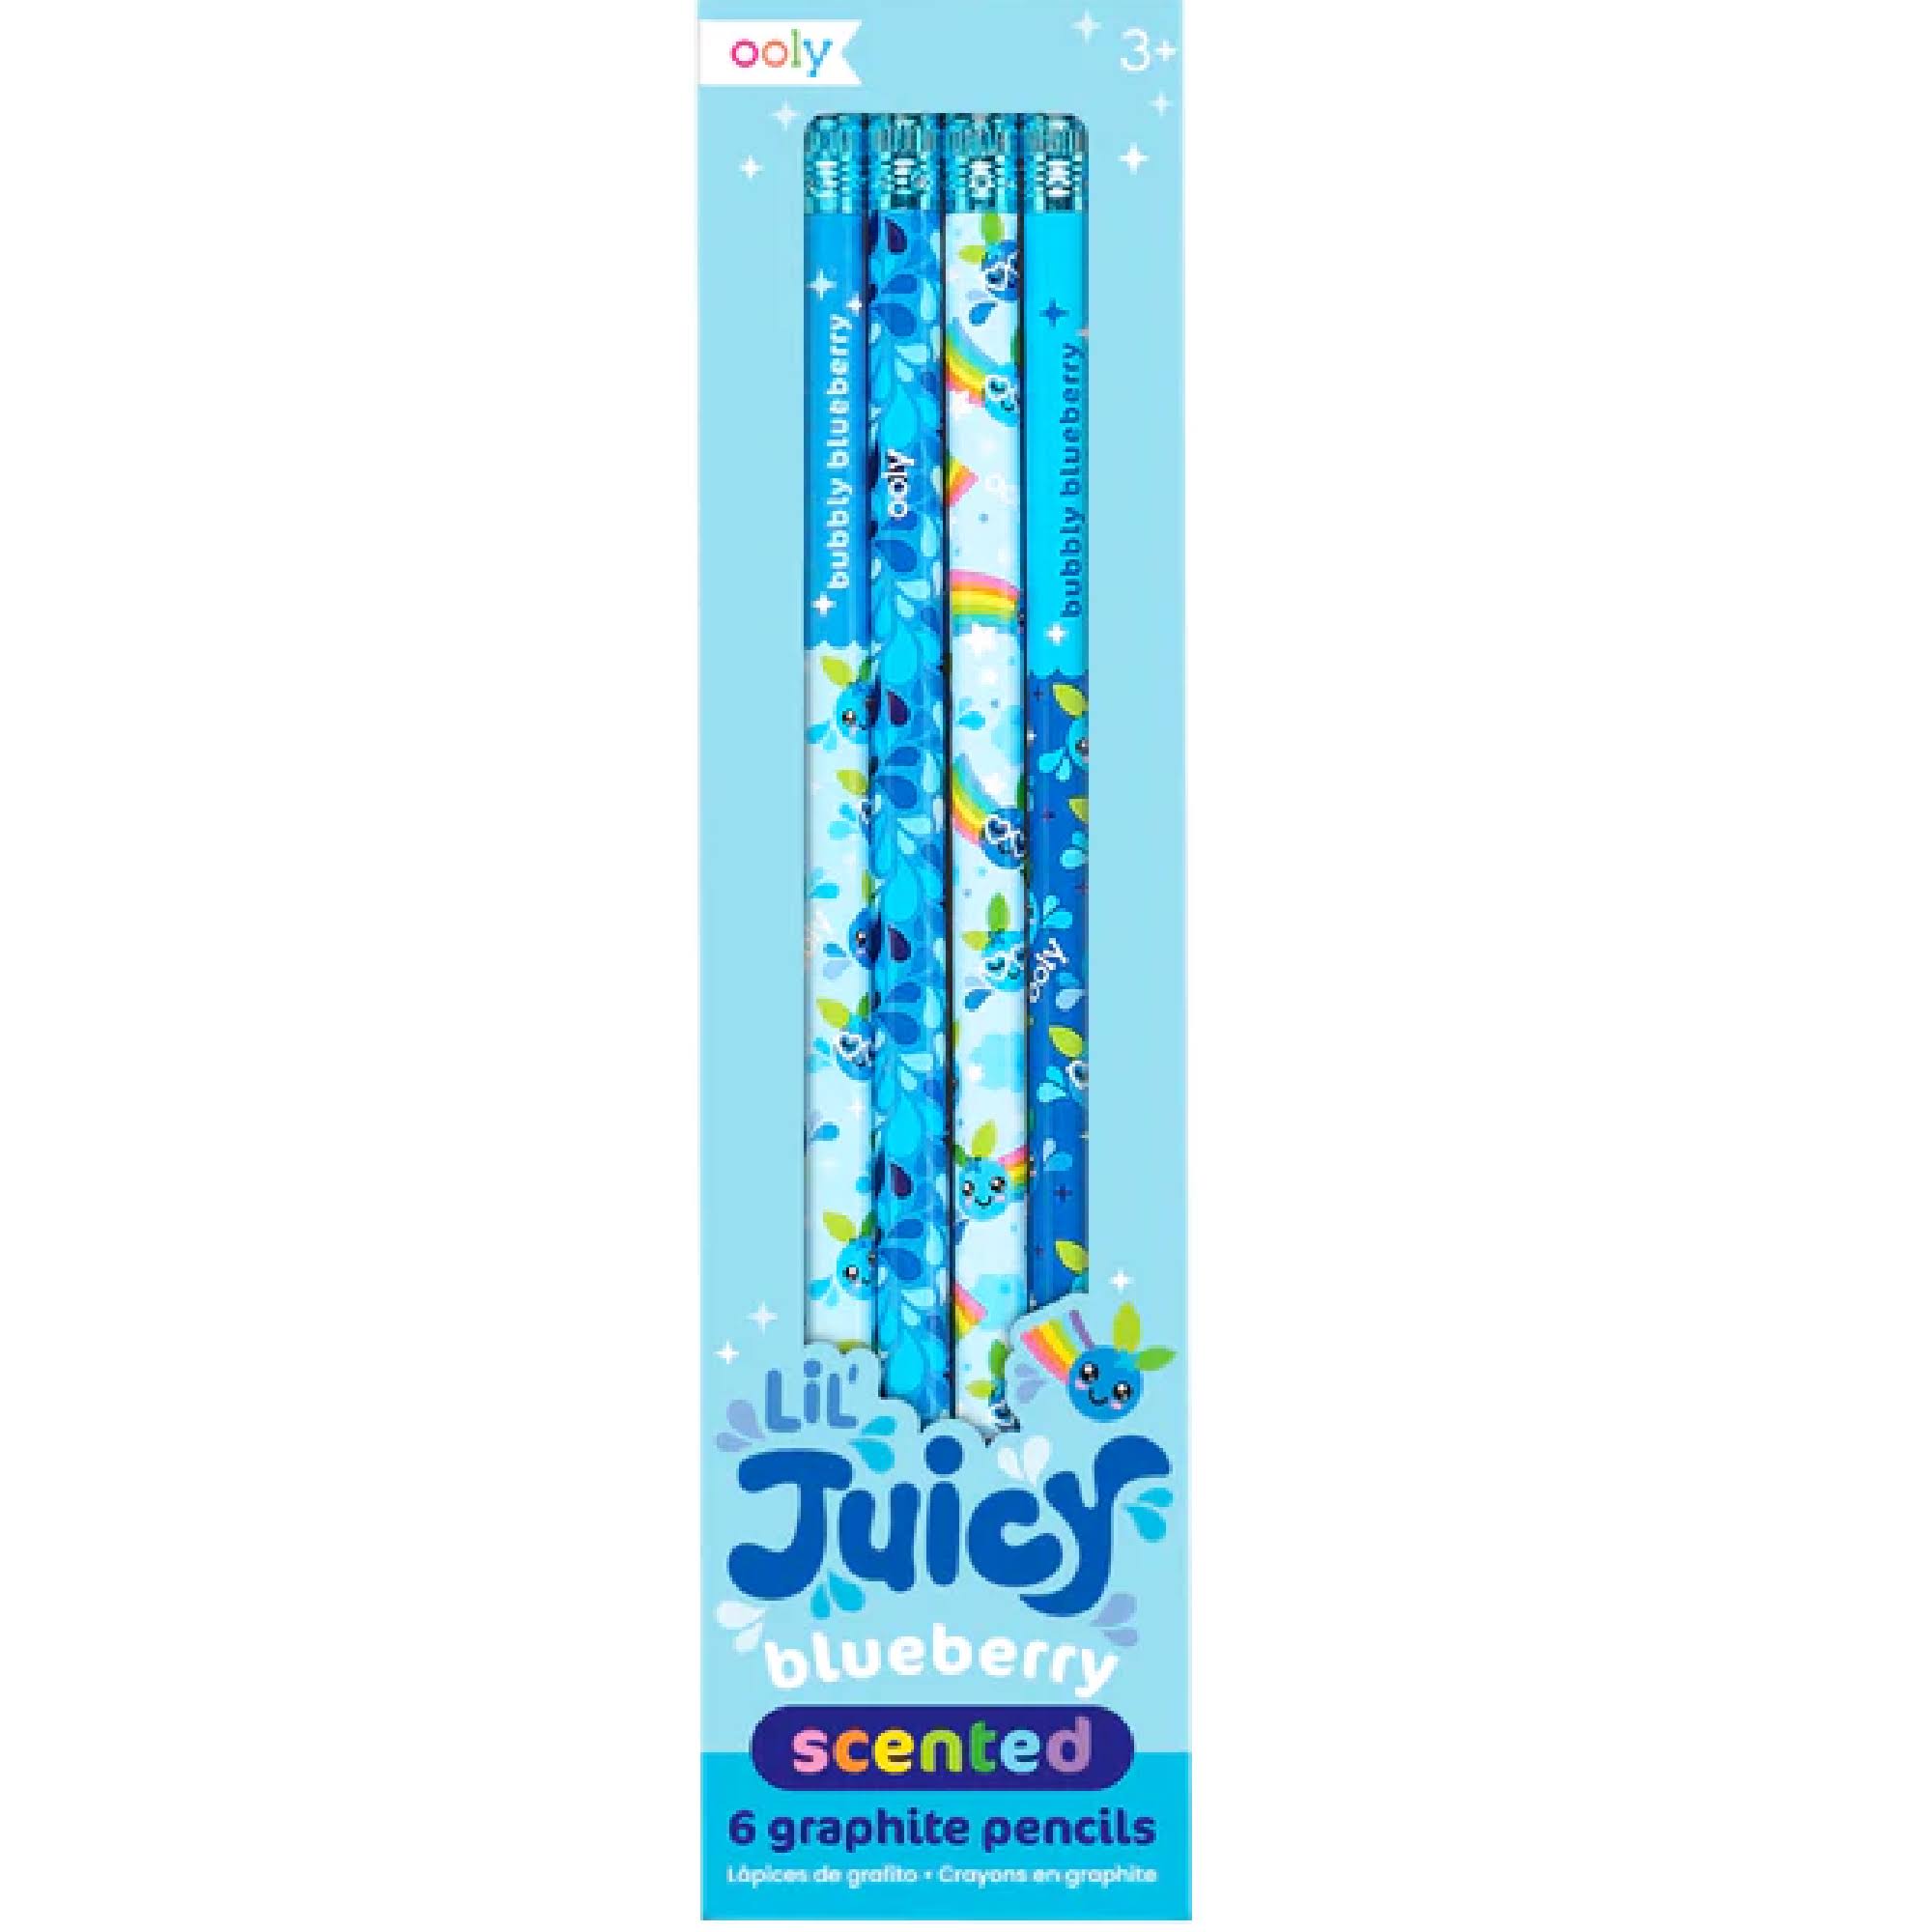 Ooly Lil Juicy Scented Graphite Pencils - Blueberry - Set of 6